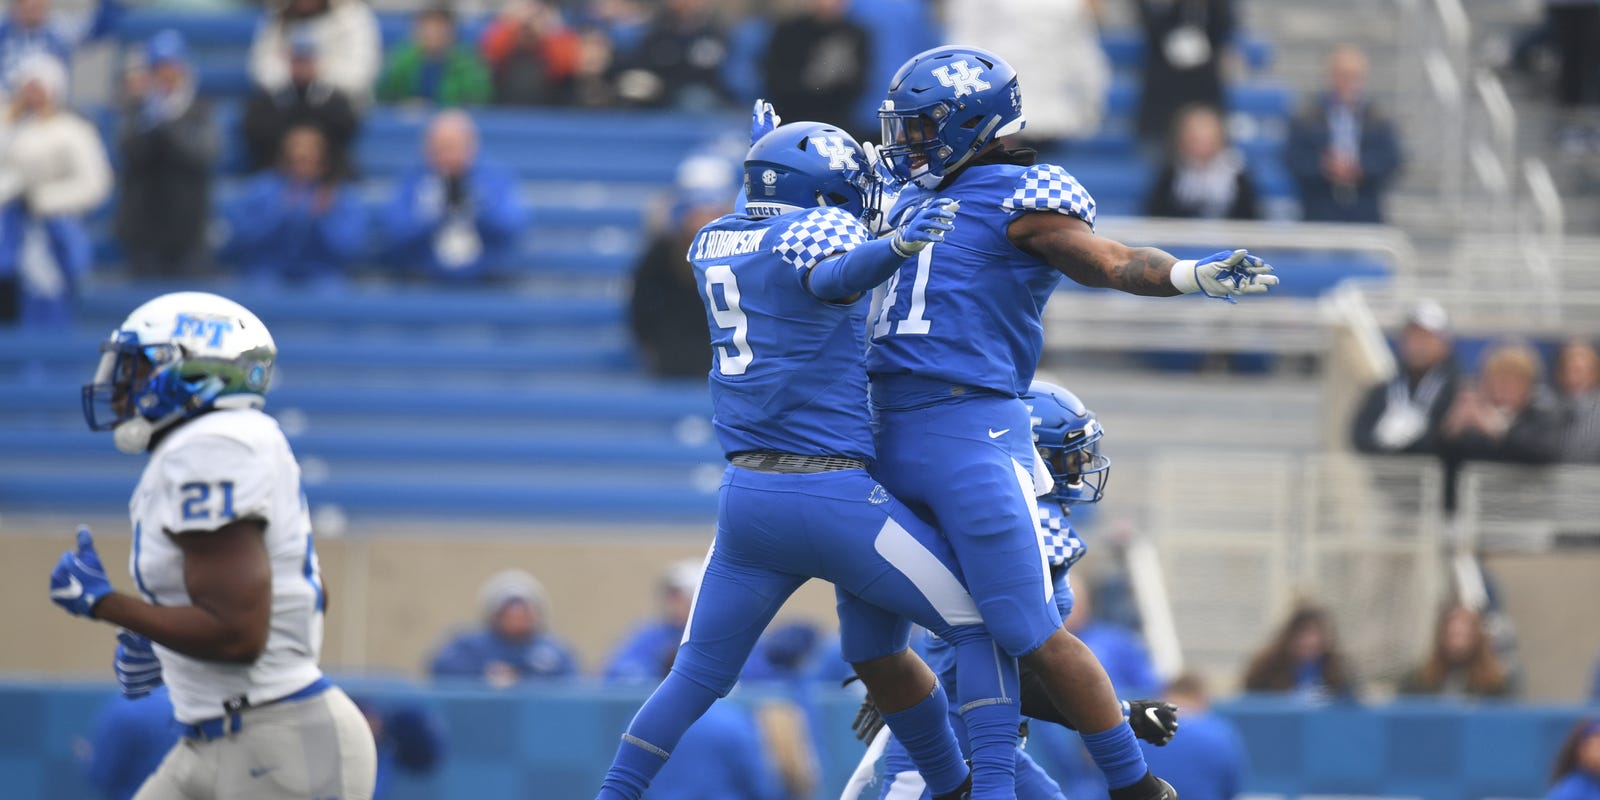 Kentucky Football Needs To Schedule More Nonconference Power